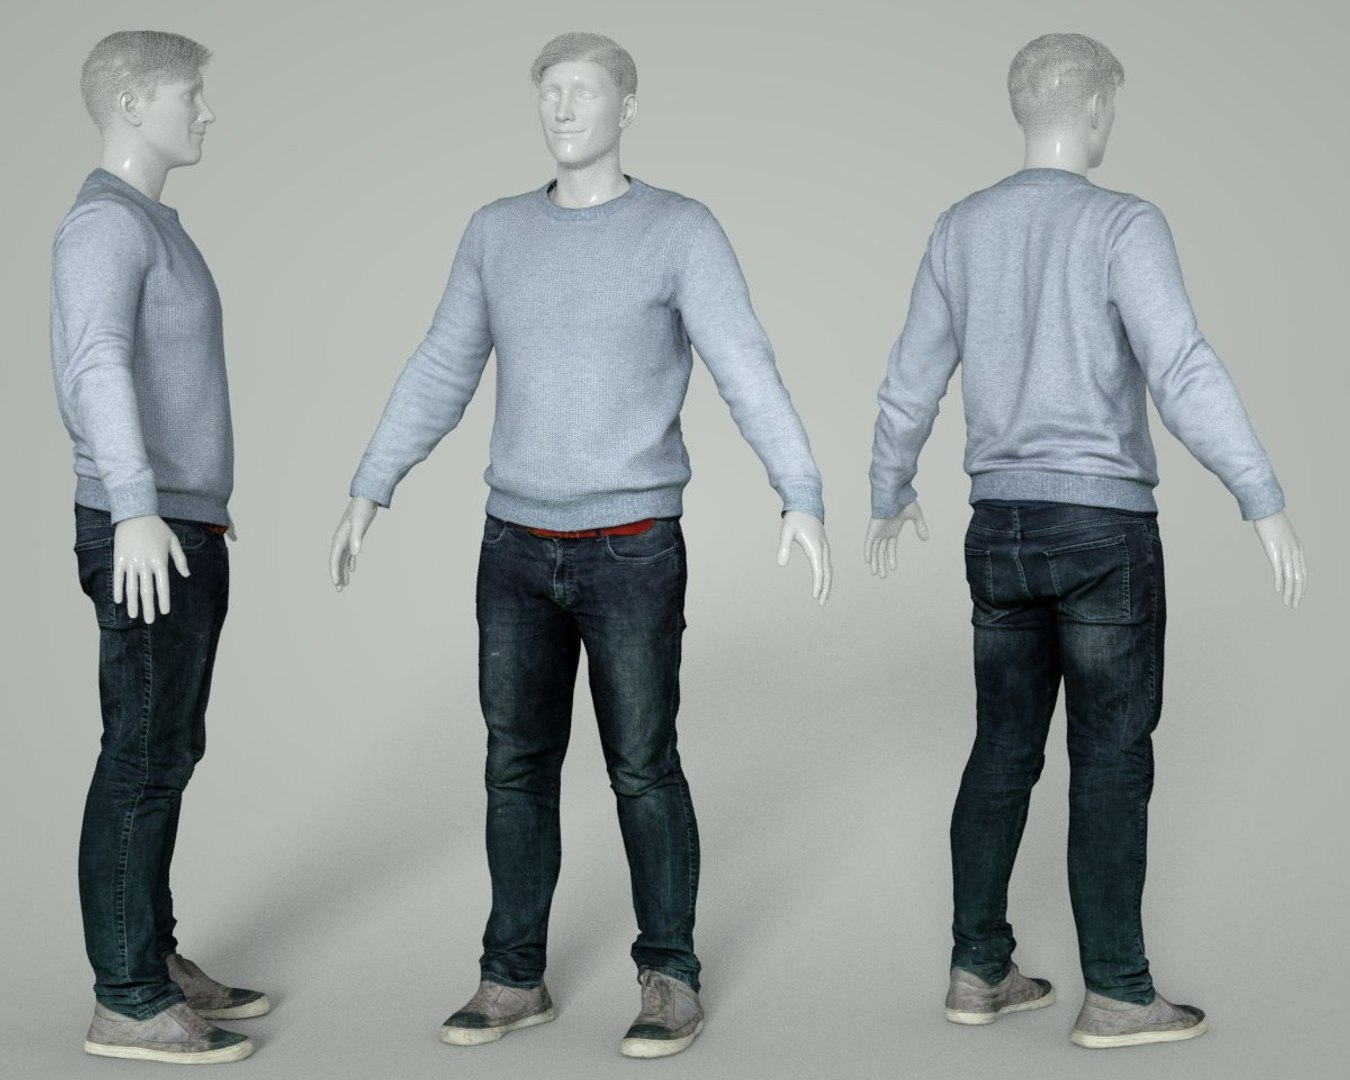 Male clothing outfit 3D model - TurboSquid 1329883